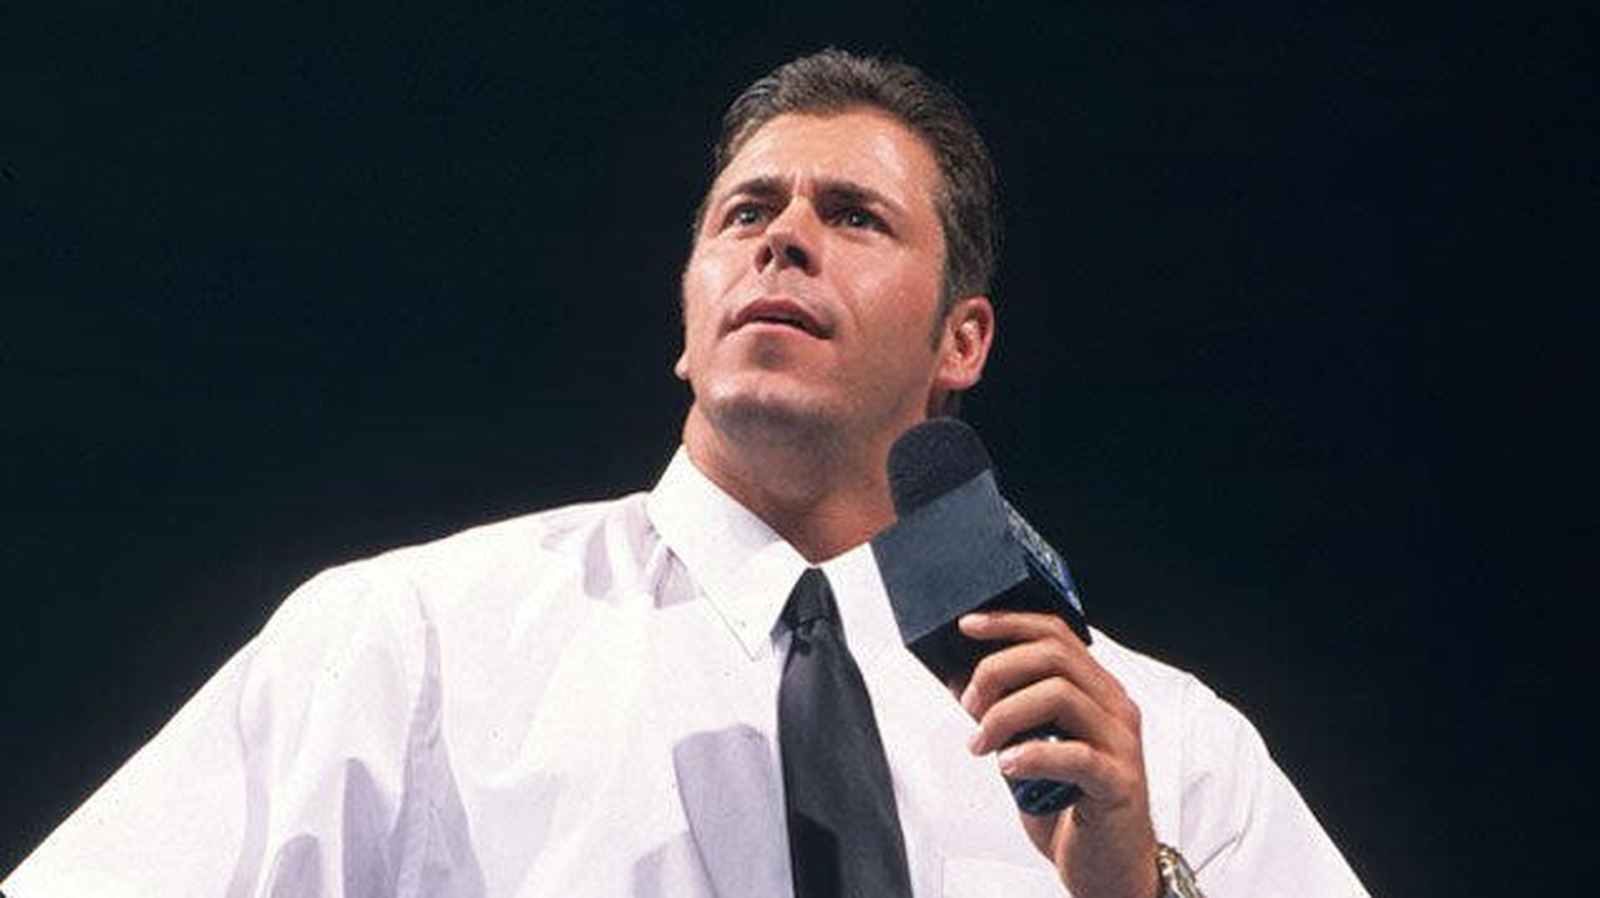 Stevie Richards Makes The Case For Former Women's Champion In WWE Hall Of Fame